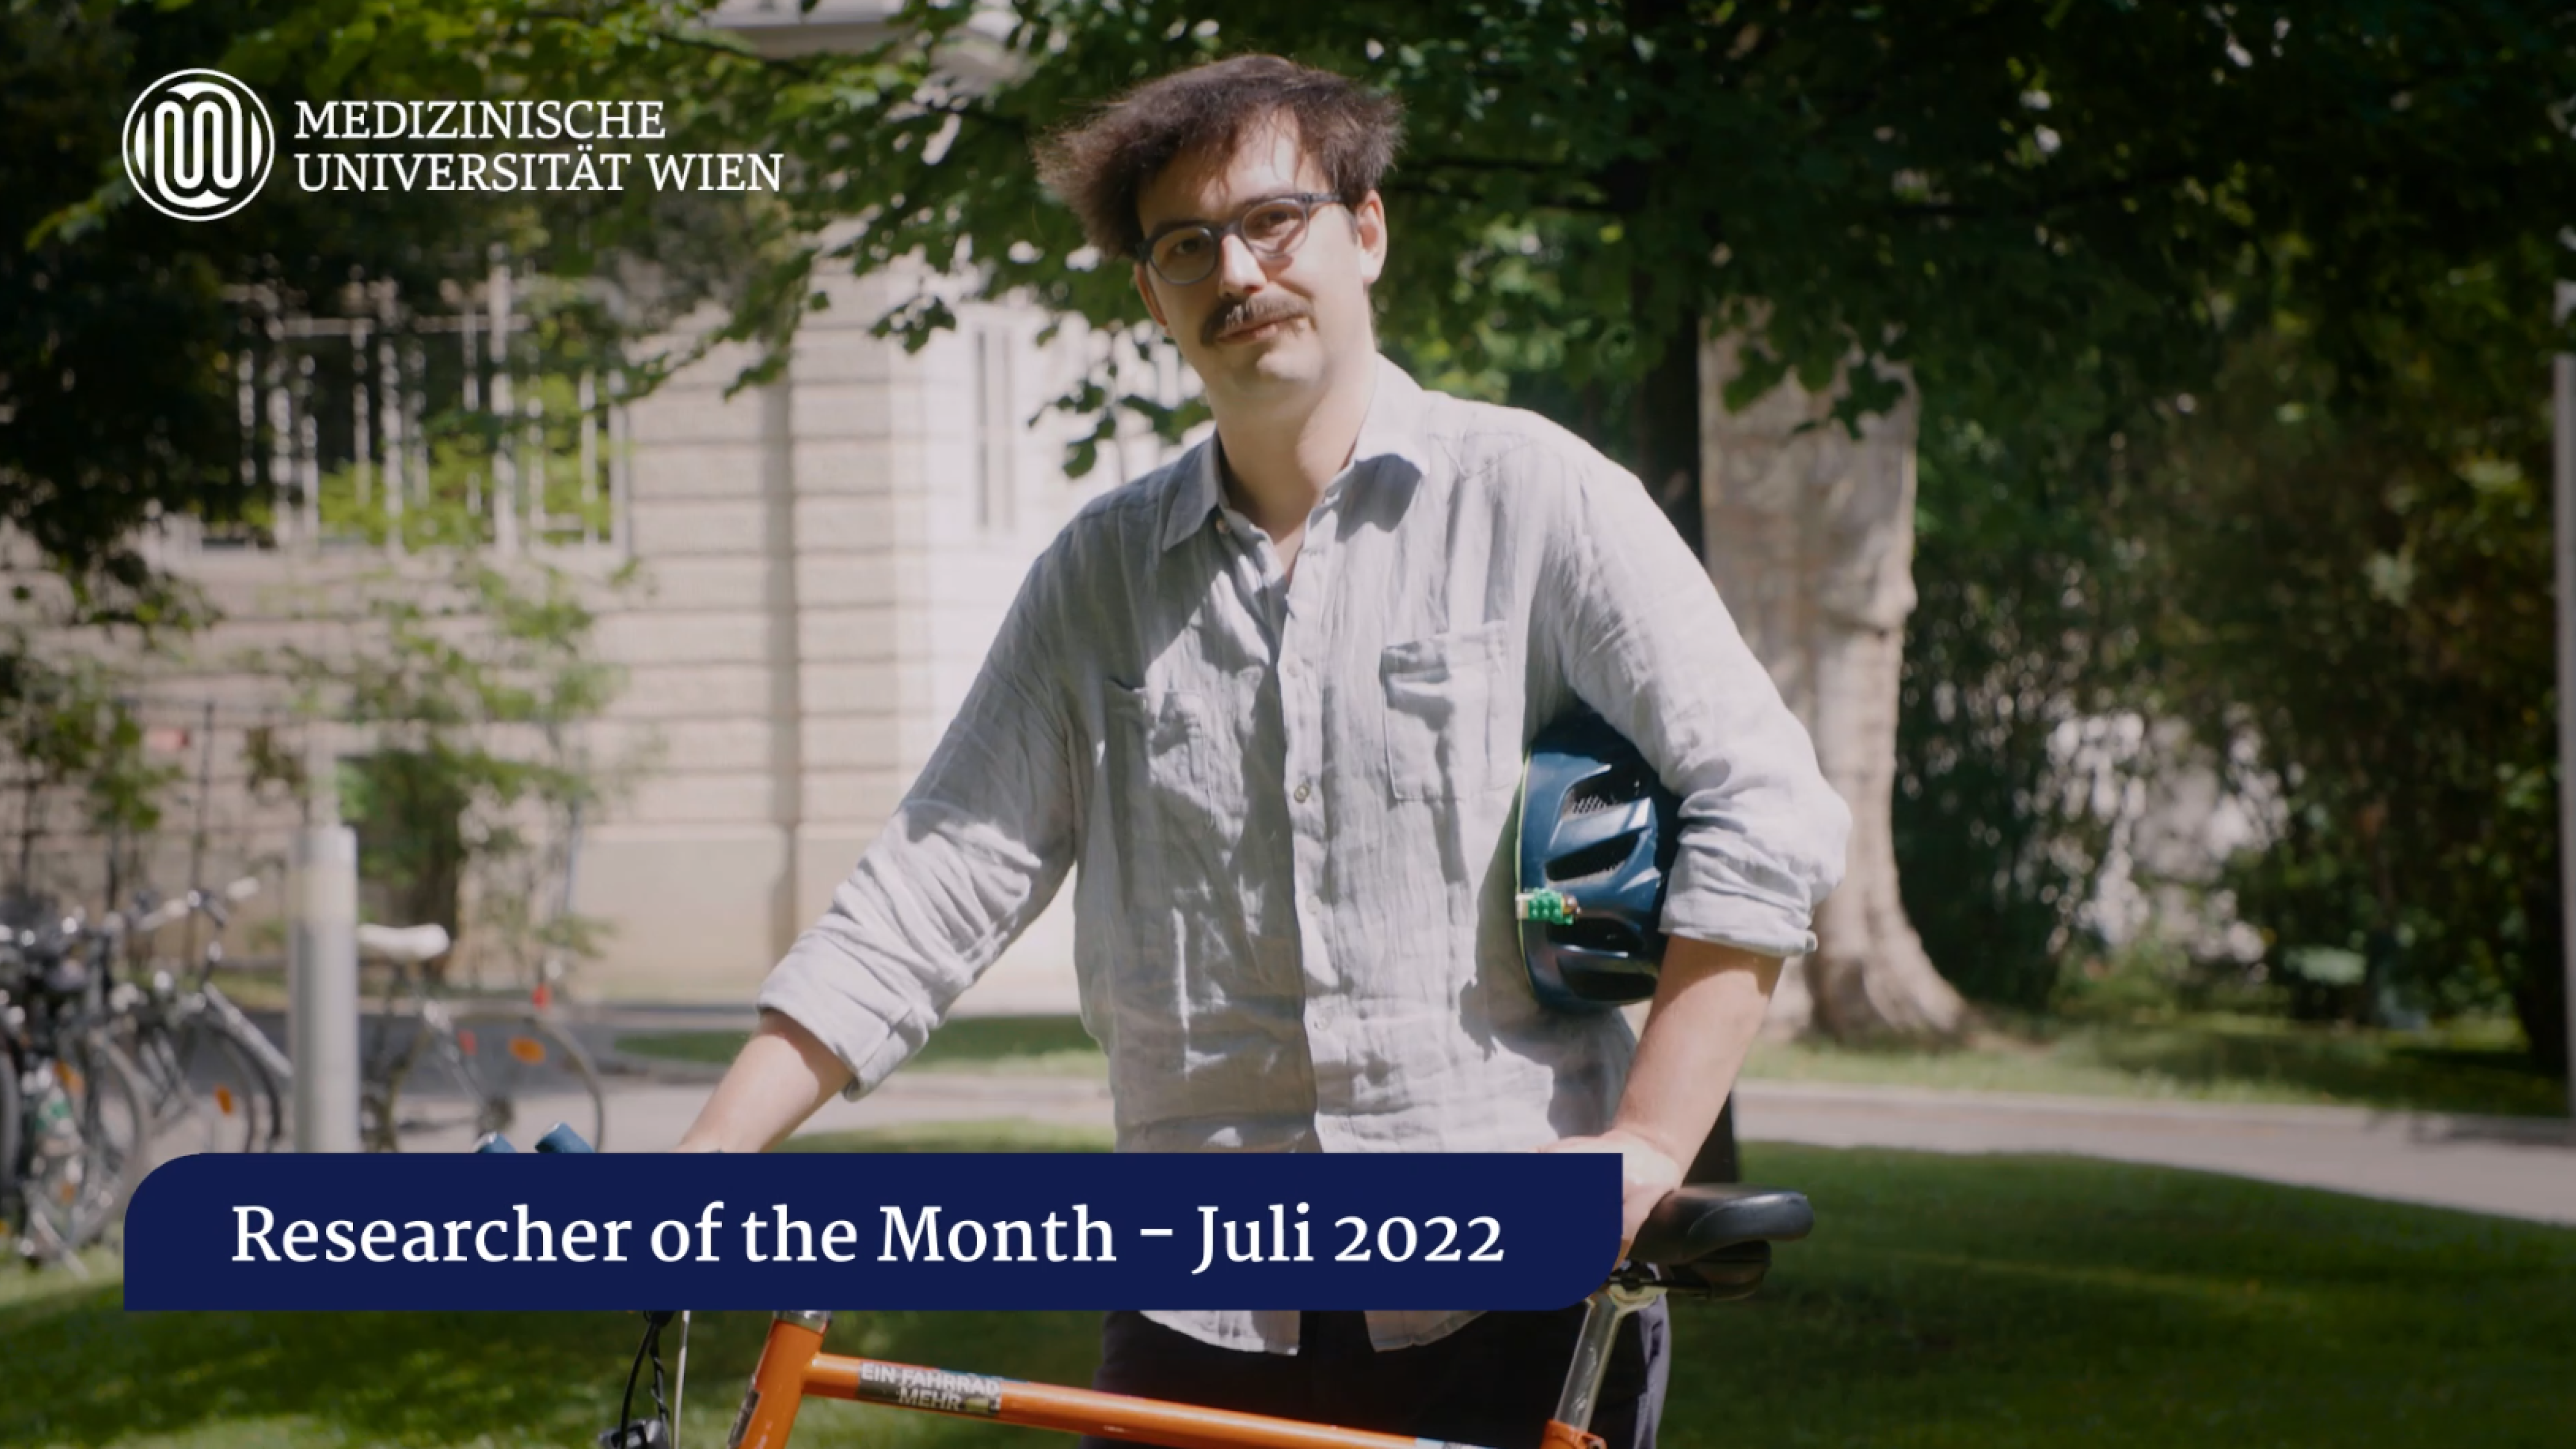 Researcher of the Month - July 2022